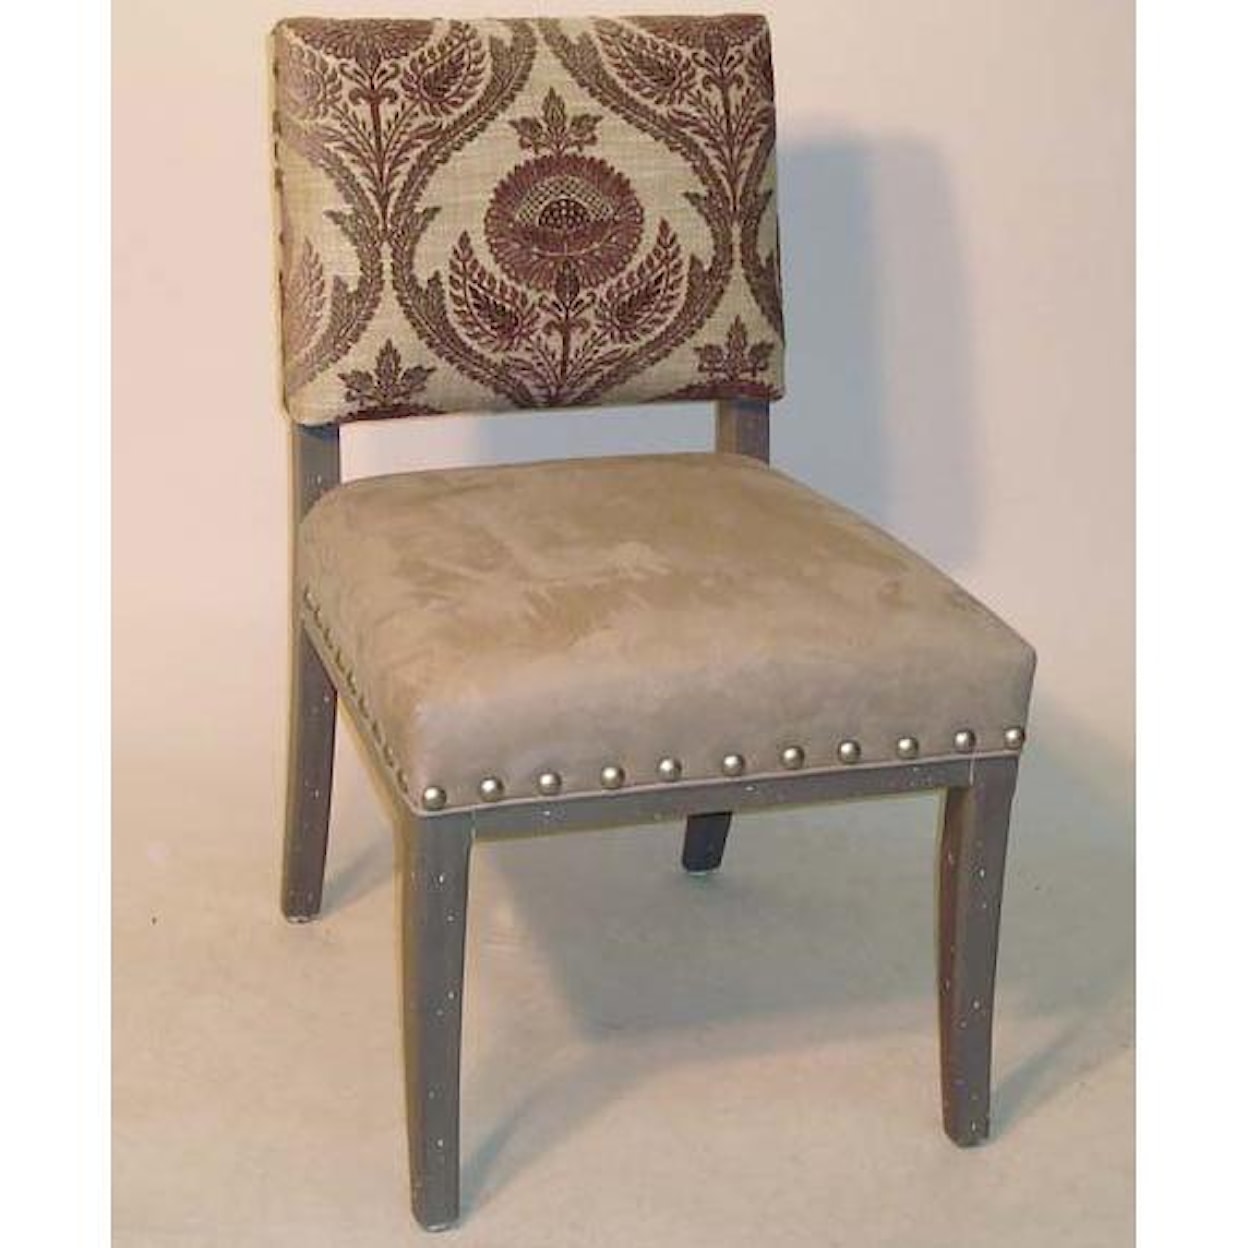 Designmaster Chairs  Side Chair